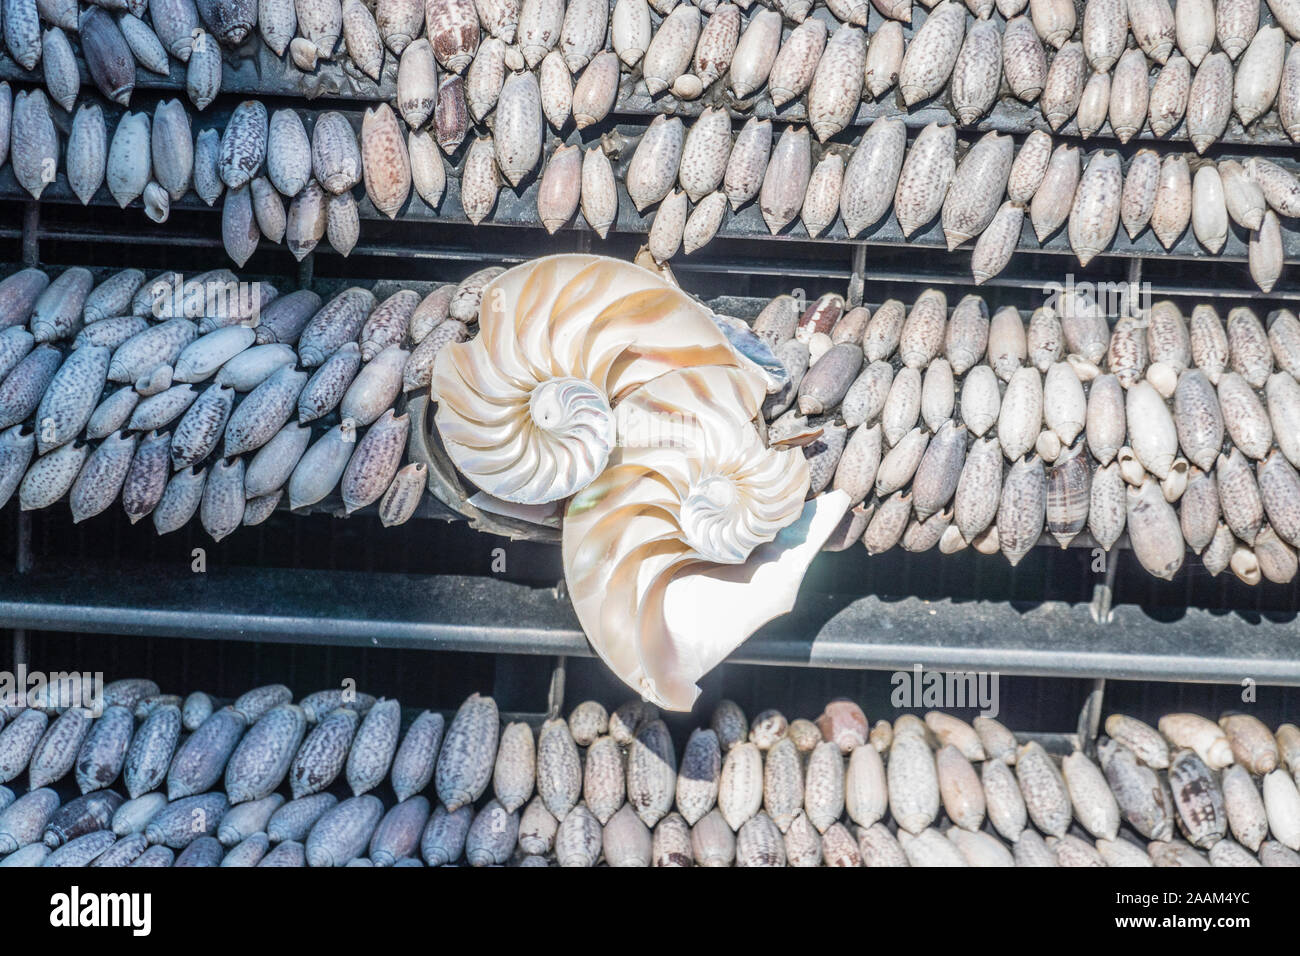 A small pickup truck covered with seashells. Stock Photo